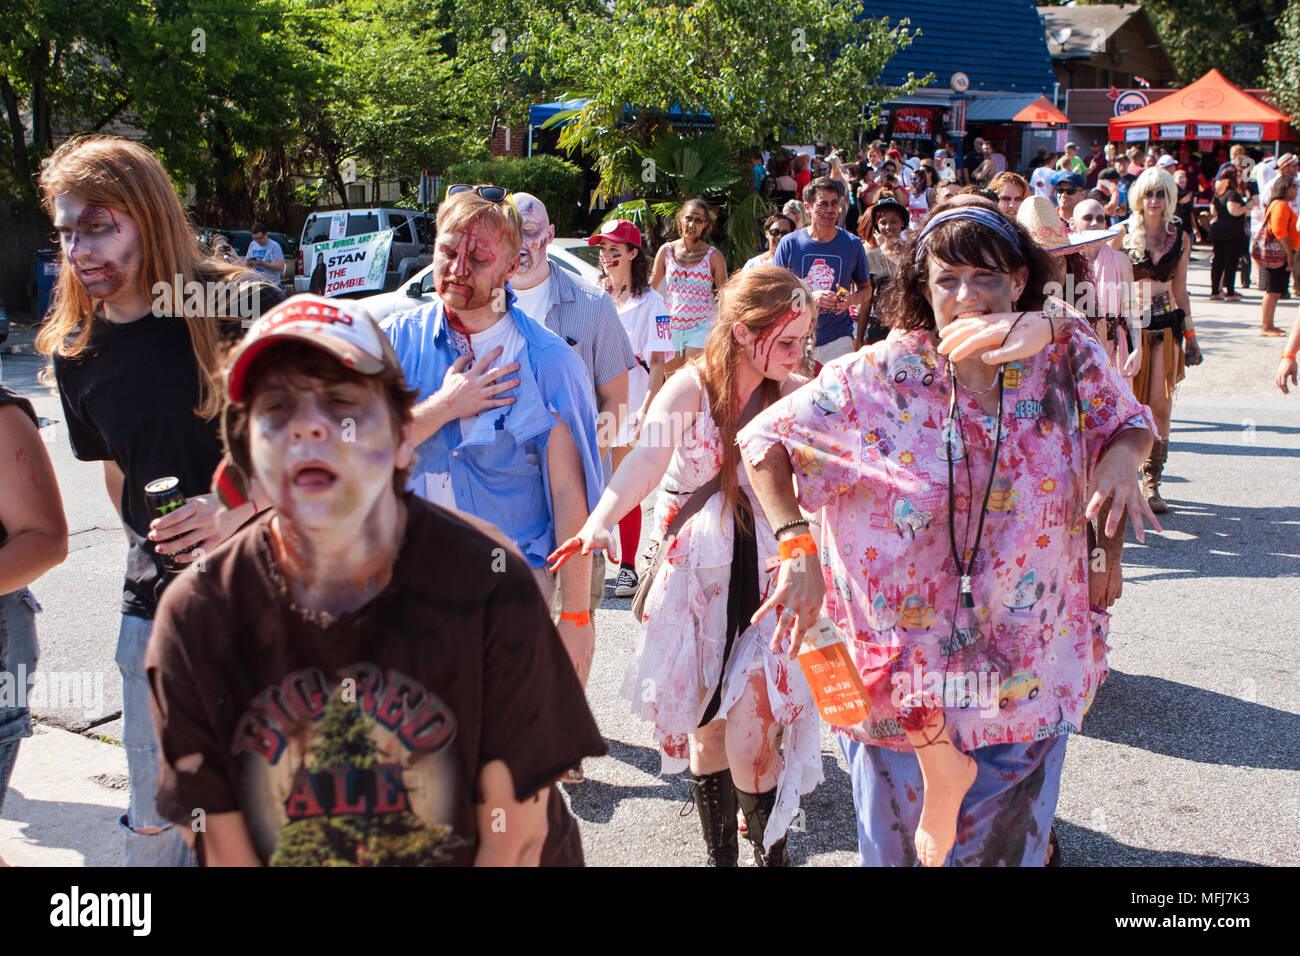 A horde of bloody zombies stagger to nearby bars as part of the Atlanta Zombie Pub Crawl on July 25, 2015 in Atlanta, GA. Stock Photo